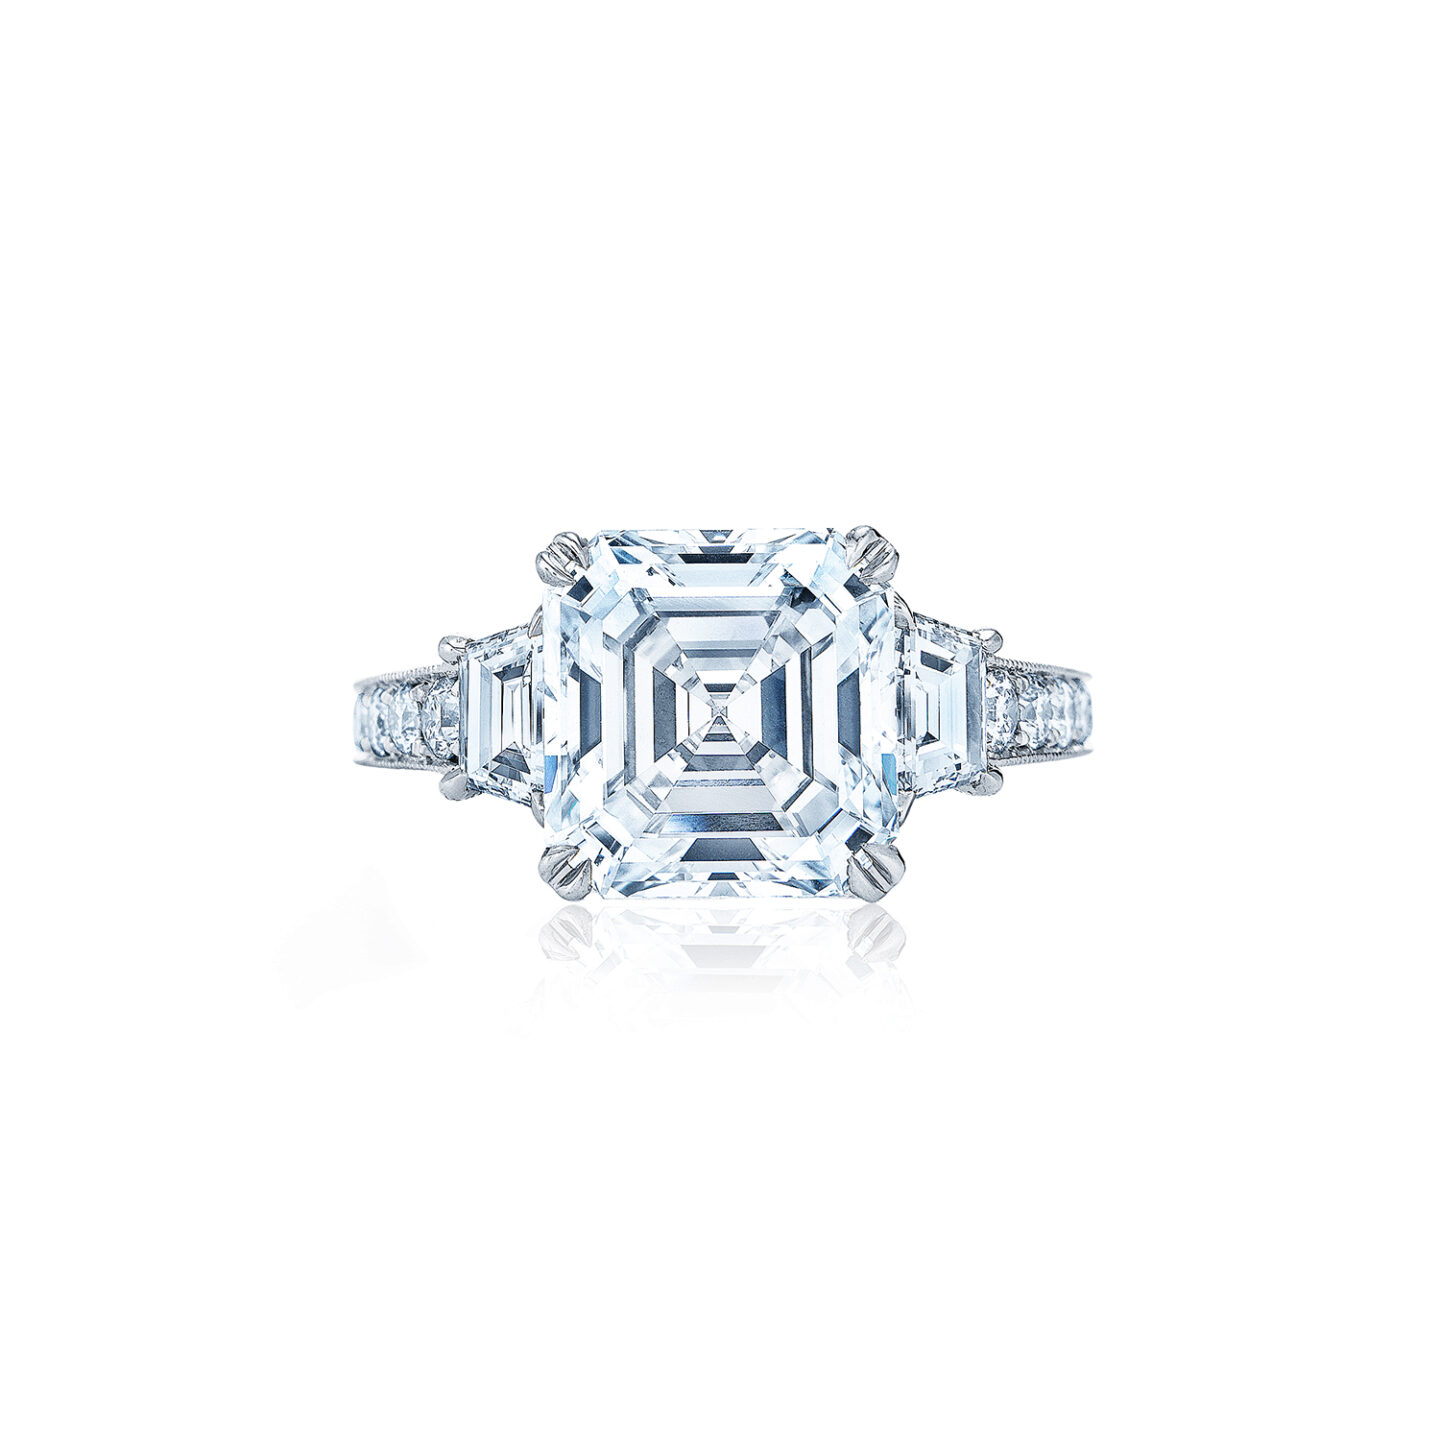 Vintage Style Engagement Ring with an Asscher Diamond